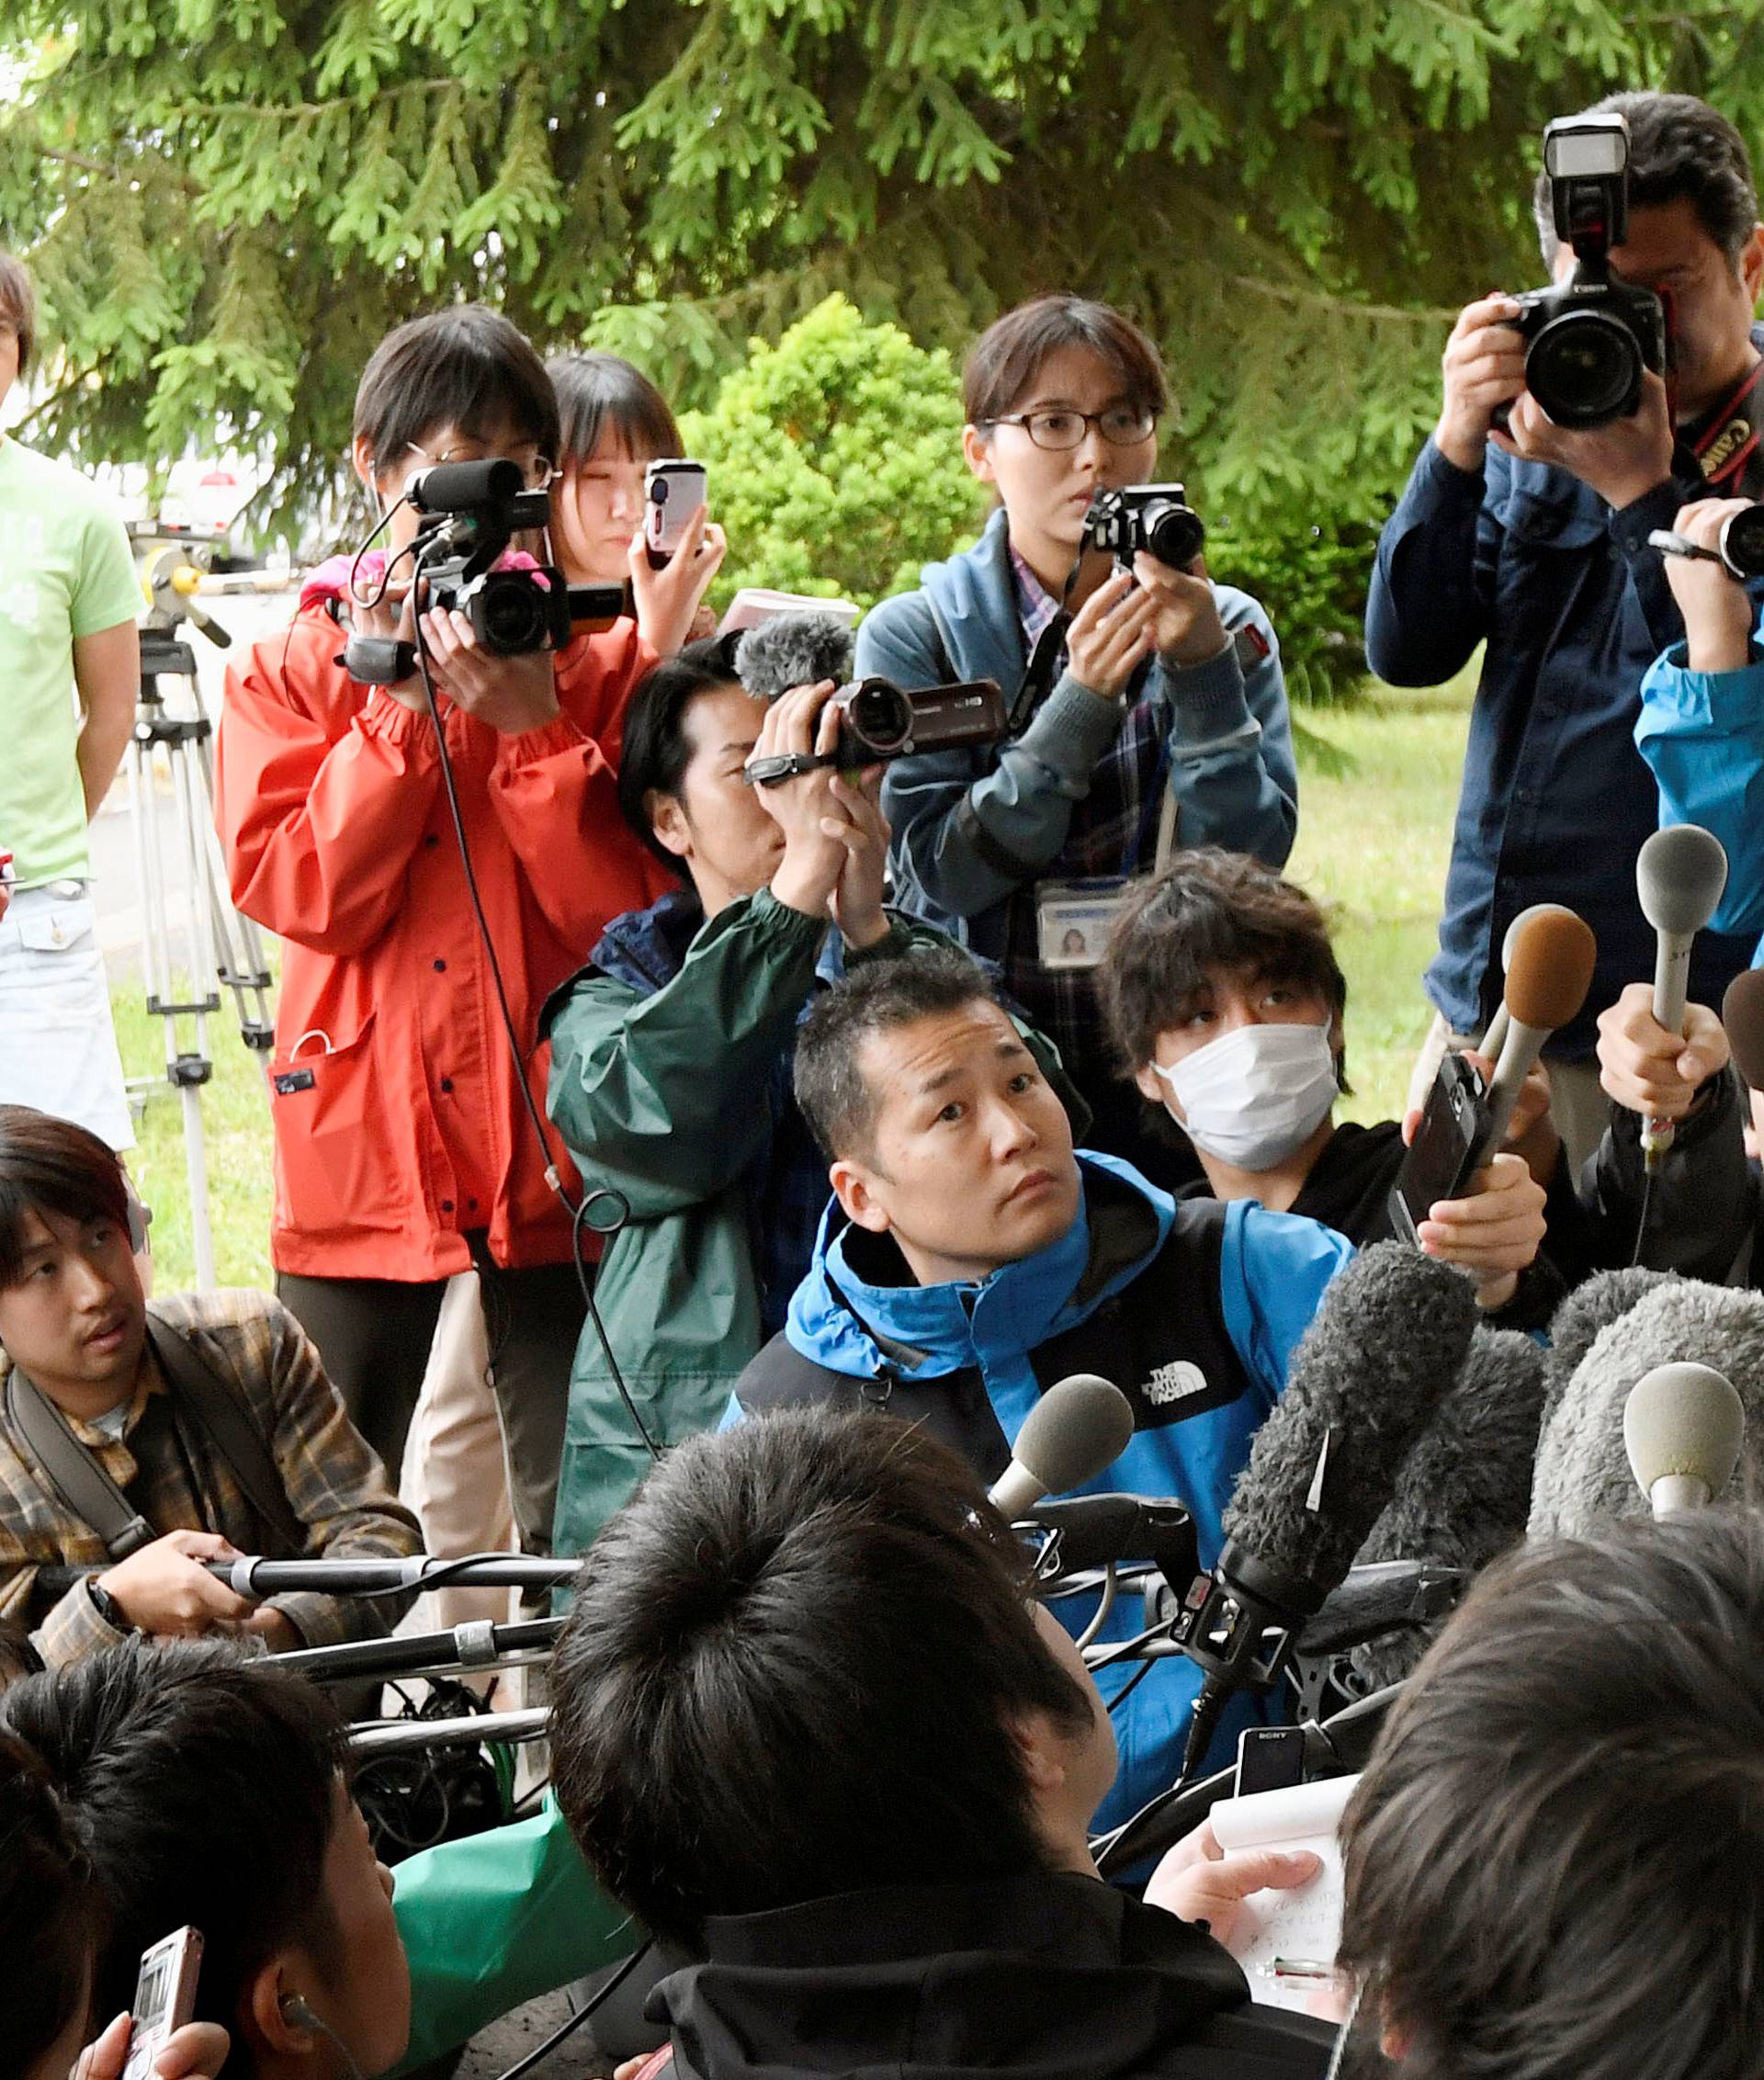 Takayuki Tanooka, father of 7-year-old boy Yamato Tanooka  who went missing on May 28, 2016 after being left behind by his parents, was found alive, speaks to the media in Hakodate